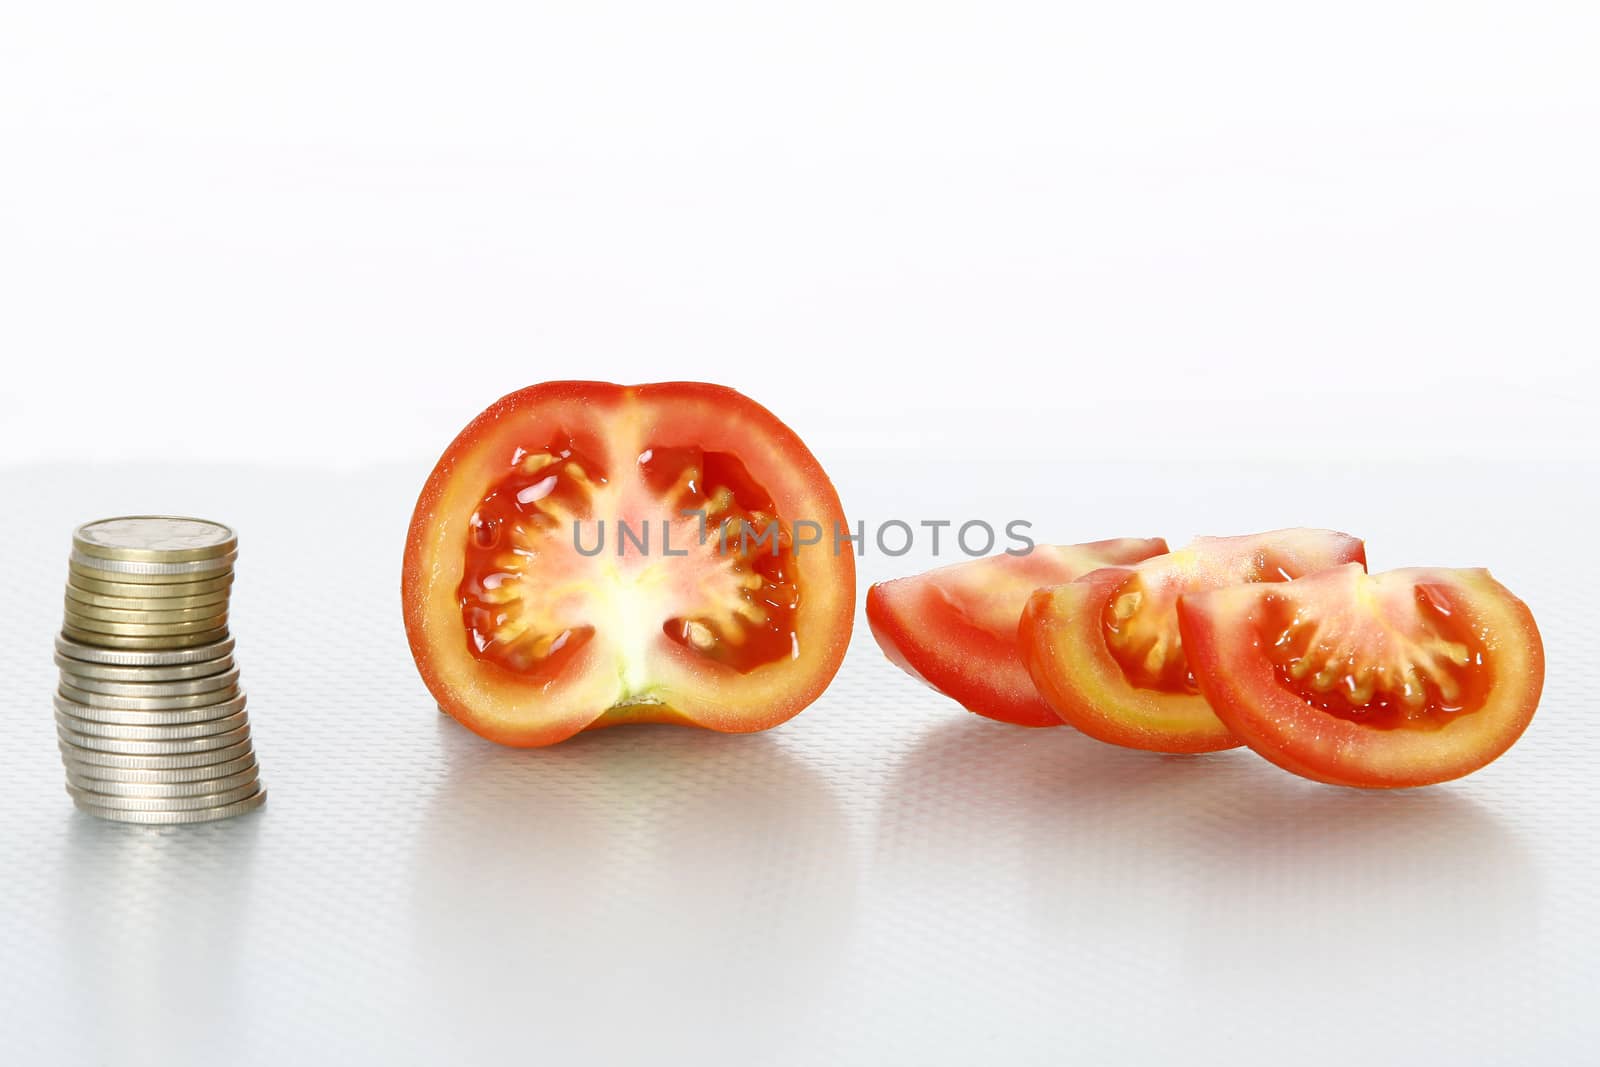 Tomato vegetables pile isolated on white background cutout with coins